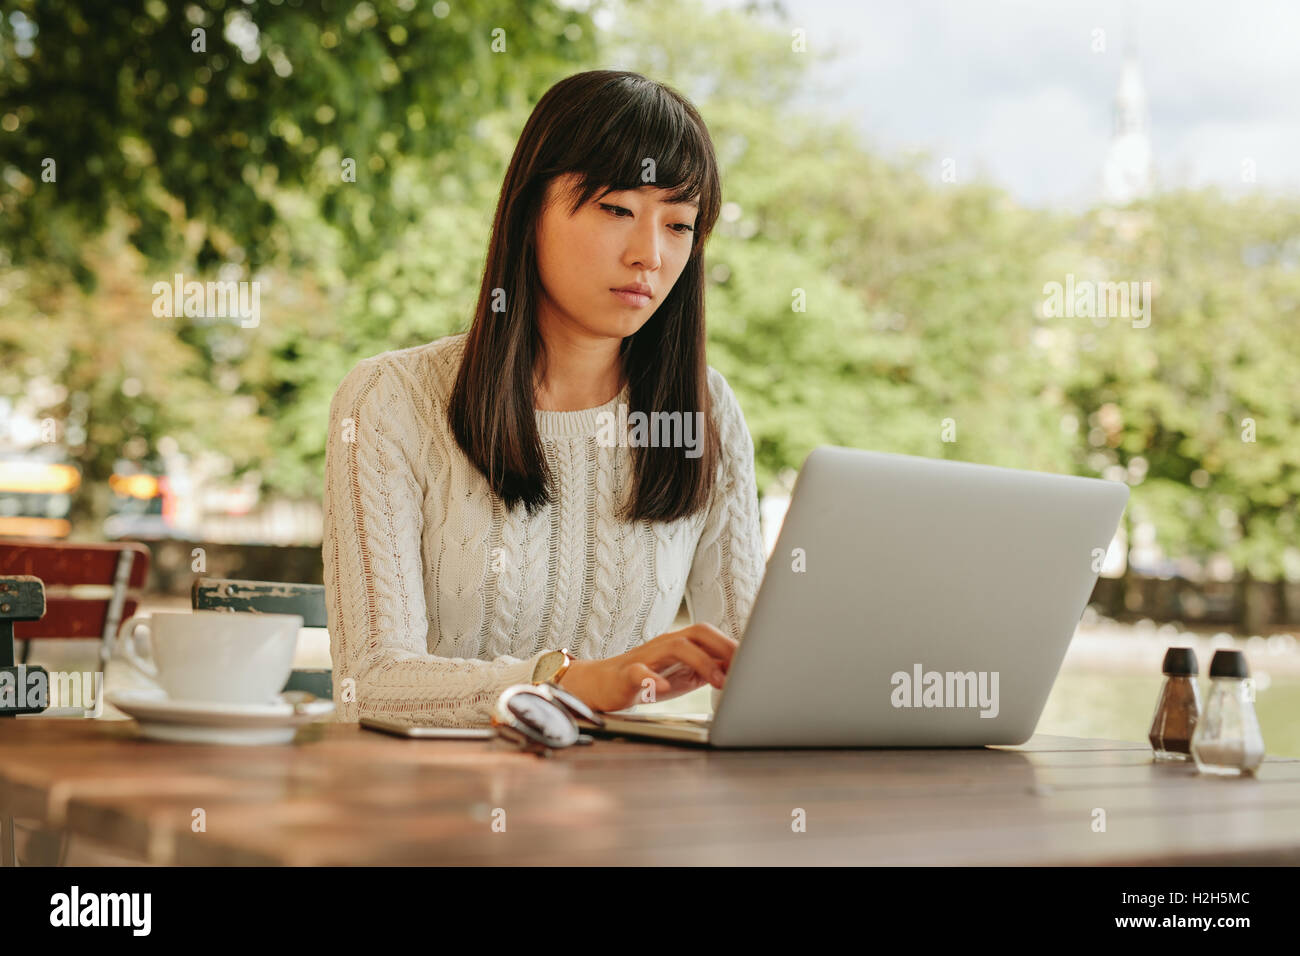 Shot of attractive young woman sitting at cafe table outdoors and working on laptop. Asian female surfing internet on laptop com Stock Photo